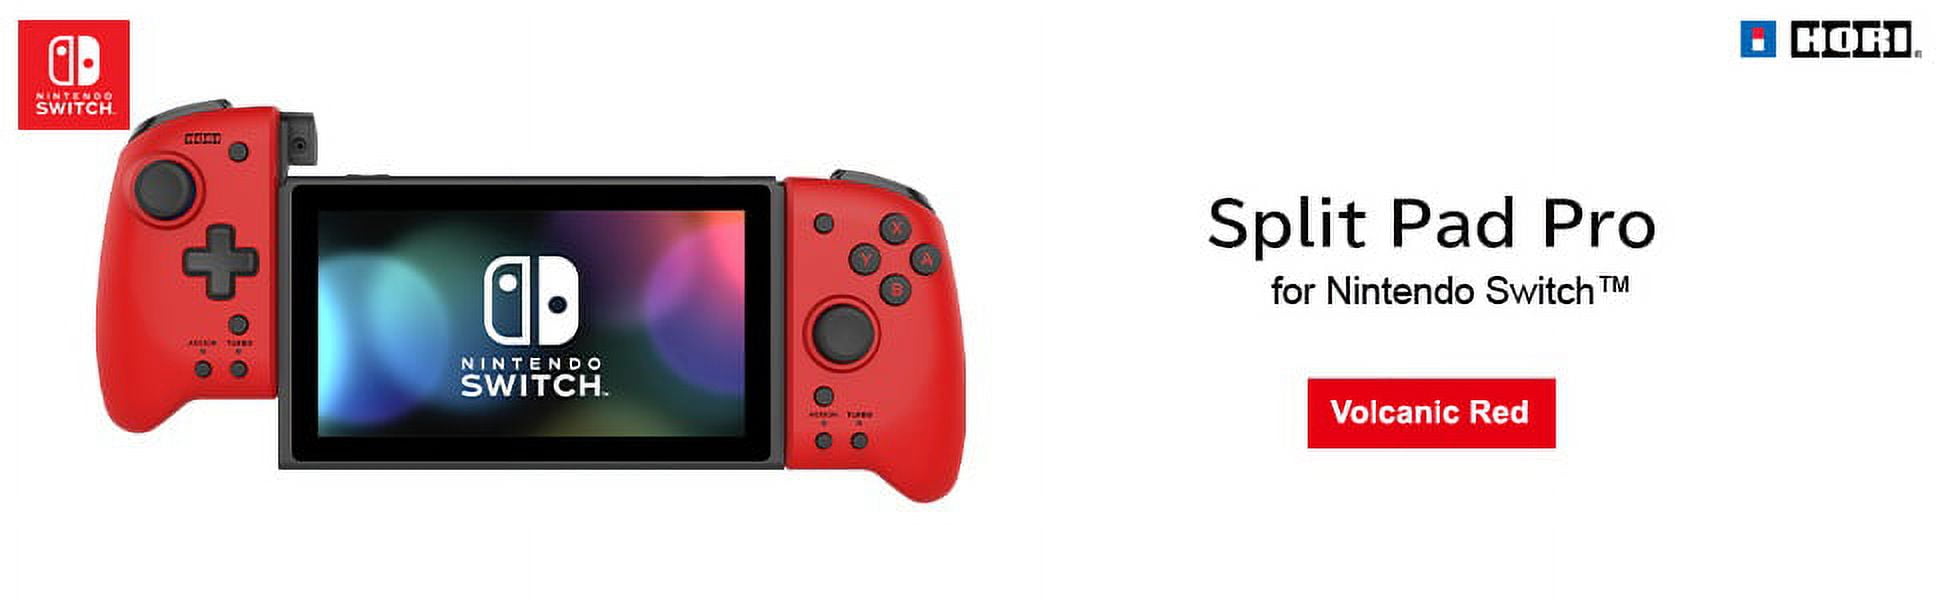 Hori Nintendo Switch Split Pad Pro (Red) Ergonomic Controller for Handheld  Mode - Officially Licensed By Nintendo